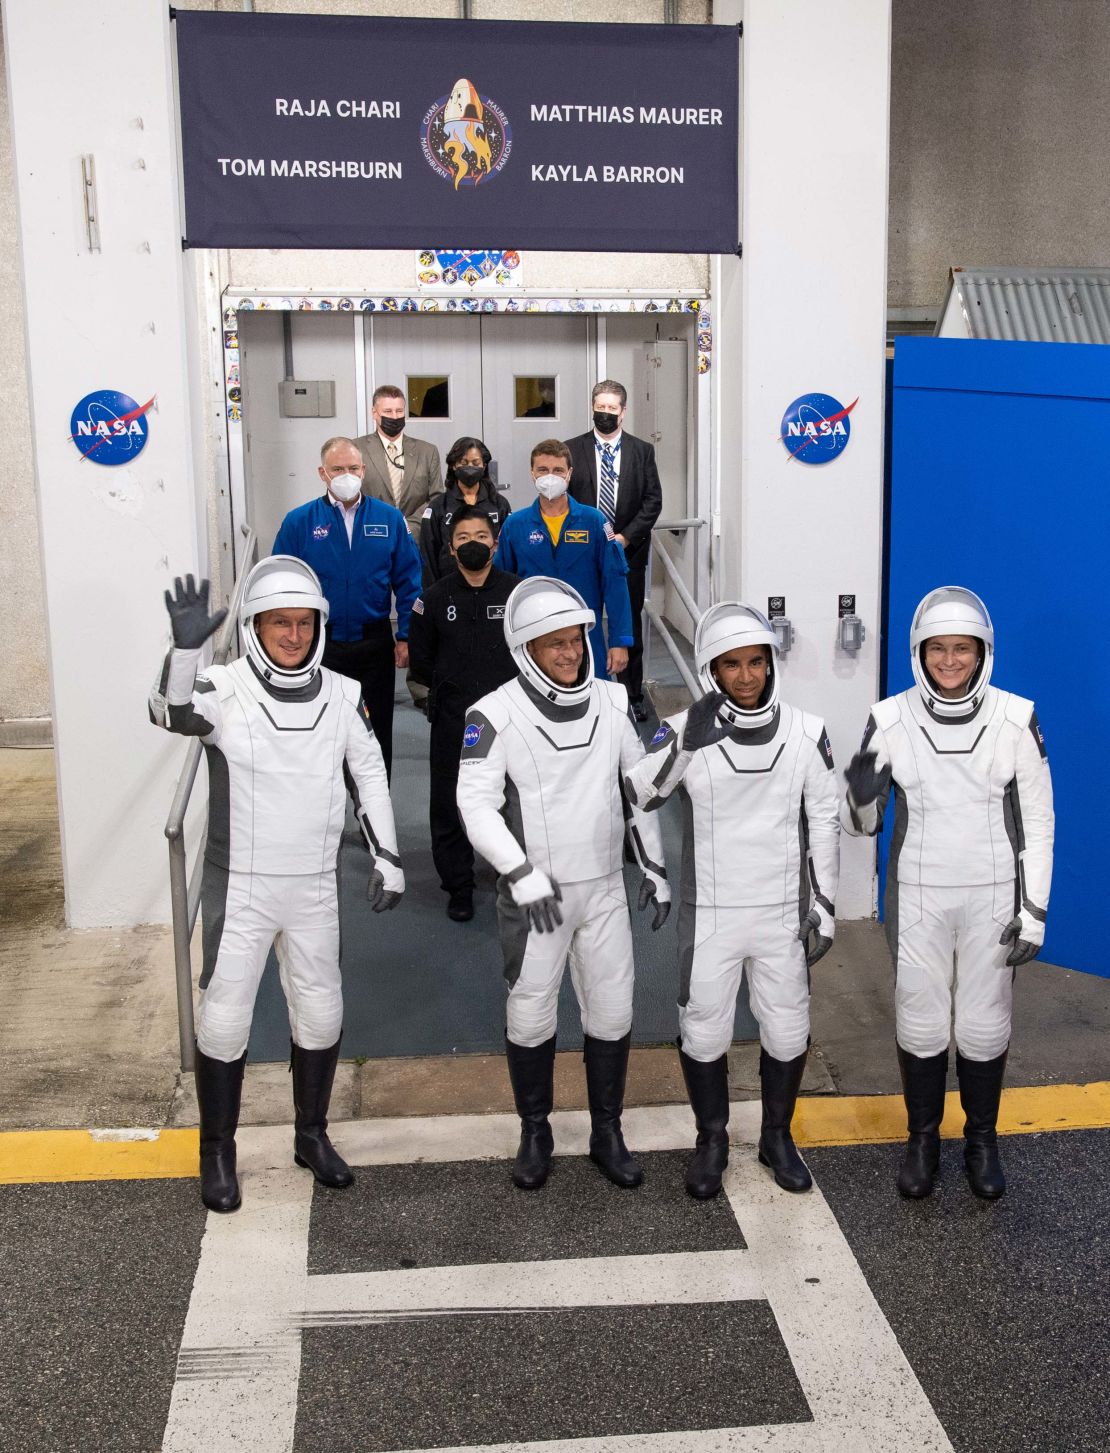 ESA (European Space Agency) astronaut Matthias Maurer, left, and NASA astronauts Tom Marshburn, second from left, Raja Chari, second from right, and Kayla Barron, right, wearing SpaceX spacesuits, are seen as they prepare to depart the Neil  A. Armstrong Operations and Checkout Building for Launch Complex 39A to board the SpaceX Crew Dragon spacecraft for the Crew-3 mission launch, Wednesday, Nov. 10, 2021, at NASA's Kennedy Space Center in Florida. NASA's SpaceX Crew-3 mission is the third crew rotation mission of the SpaceX Crew Dragon spacecraft and Falcon 9 rocket to the International Space Station as part of the agency's Commercial Crew Program. Chari, Marshburn, Barron, Maurer are scheduled to launch at 9:03 p.m. EST, from Launch Complex 39A at the Kennedy Space Center.  Photo Credit: (NASA/Joel Kowsky)